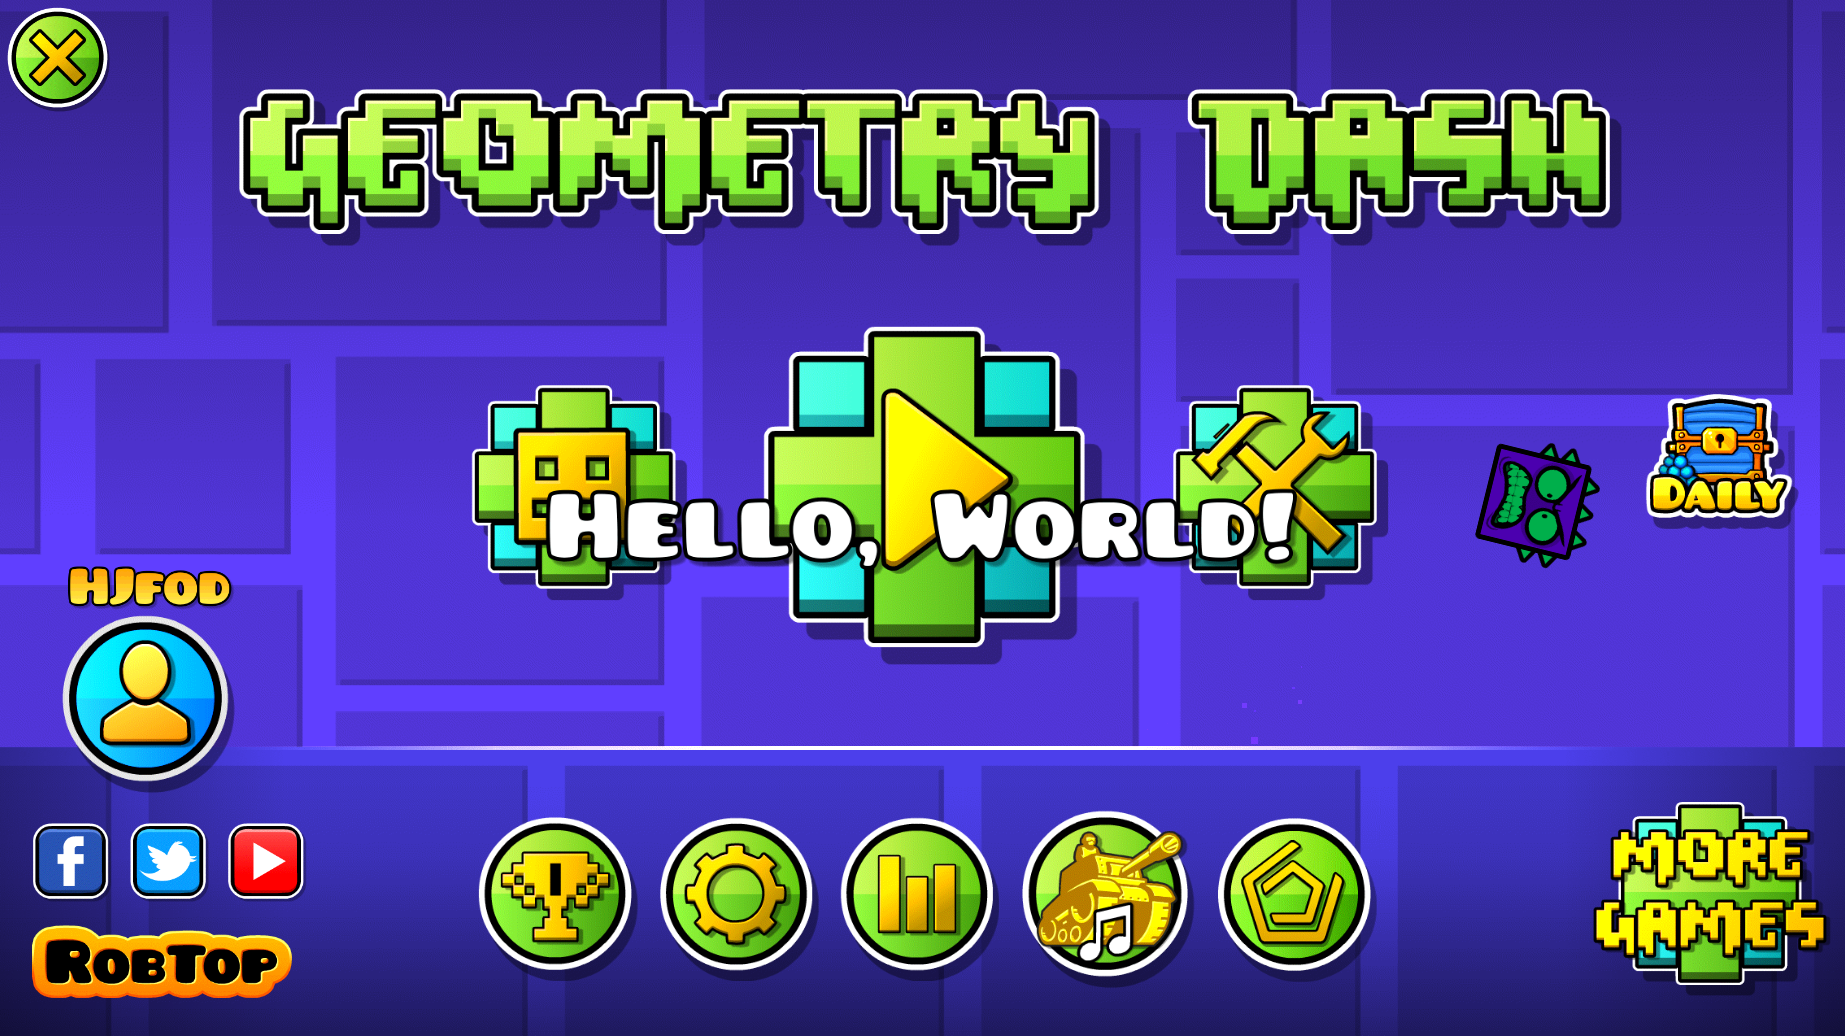 Image showing the main menu in GD with a ‘Hello, world’ text on top